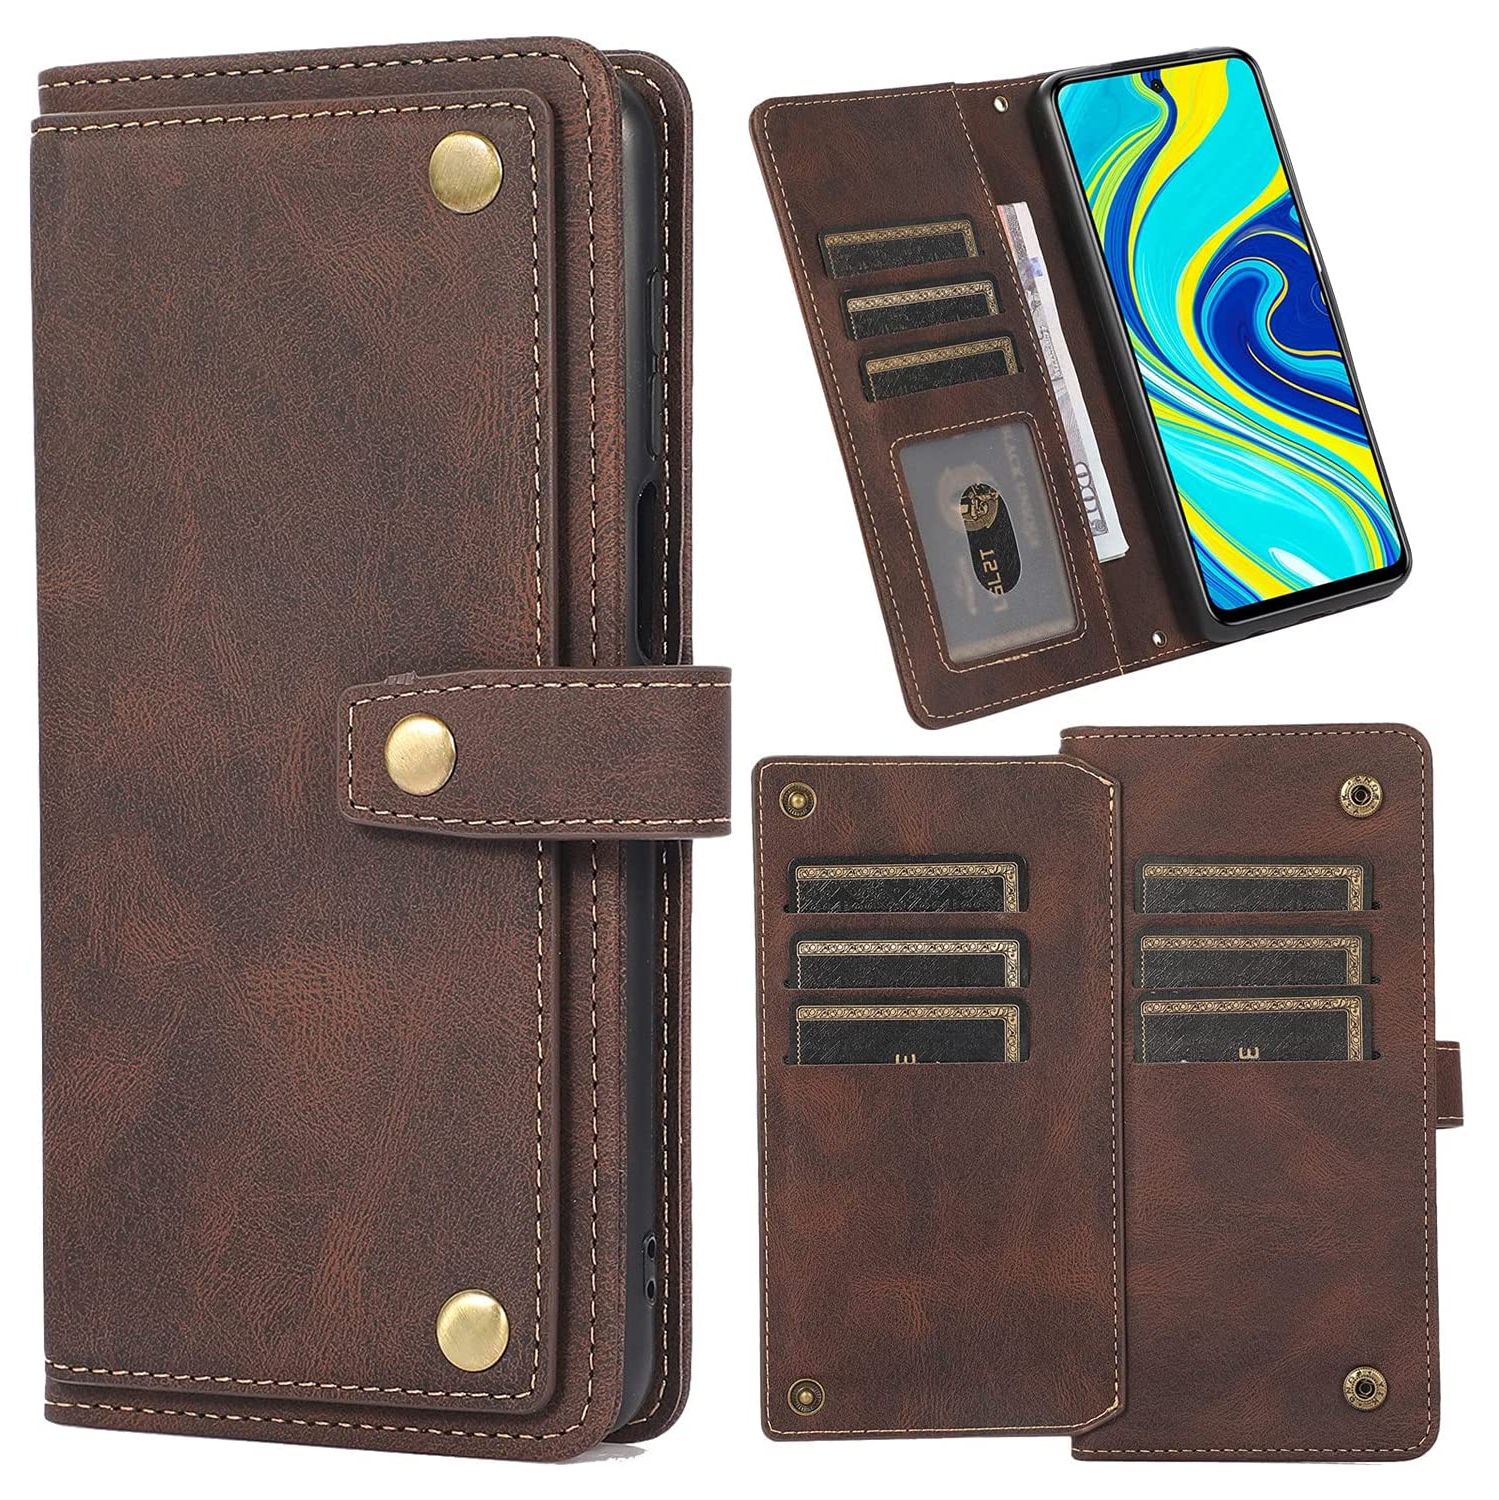 Loris & Case Retro Flip Wallet Case with 9 Card Slots Kickstand PU Leather Folio Wrist Strap Purse Phone Cover for Samsung Galaxy S22 PLUS -Brown (FREE SHIPPING)